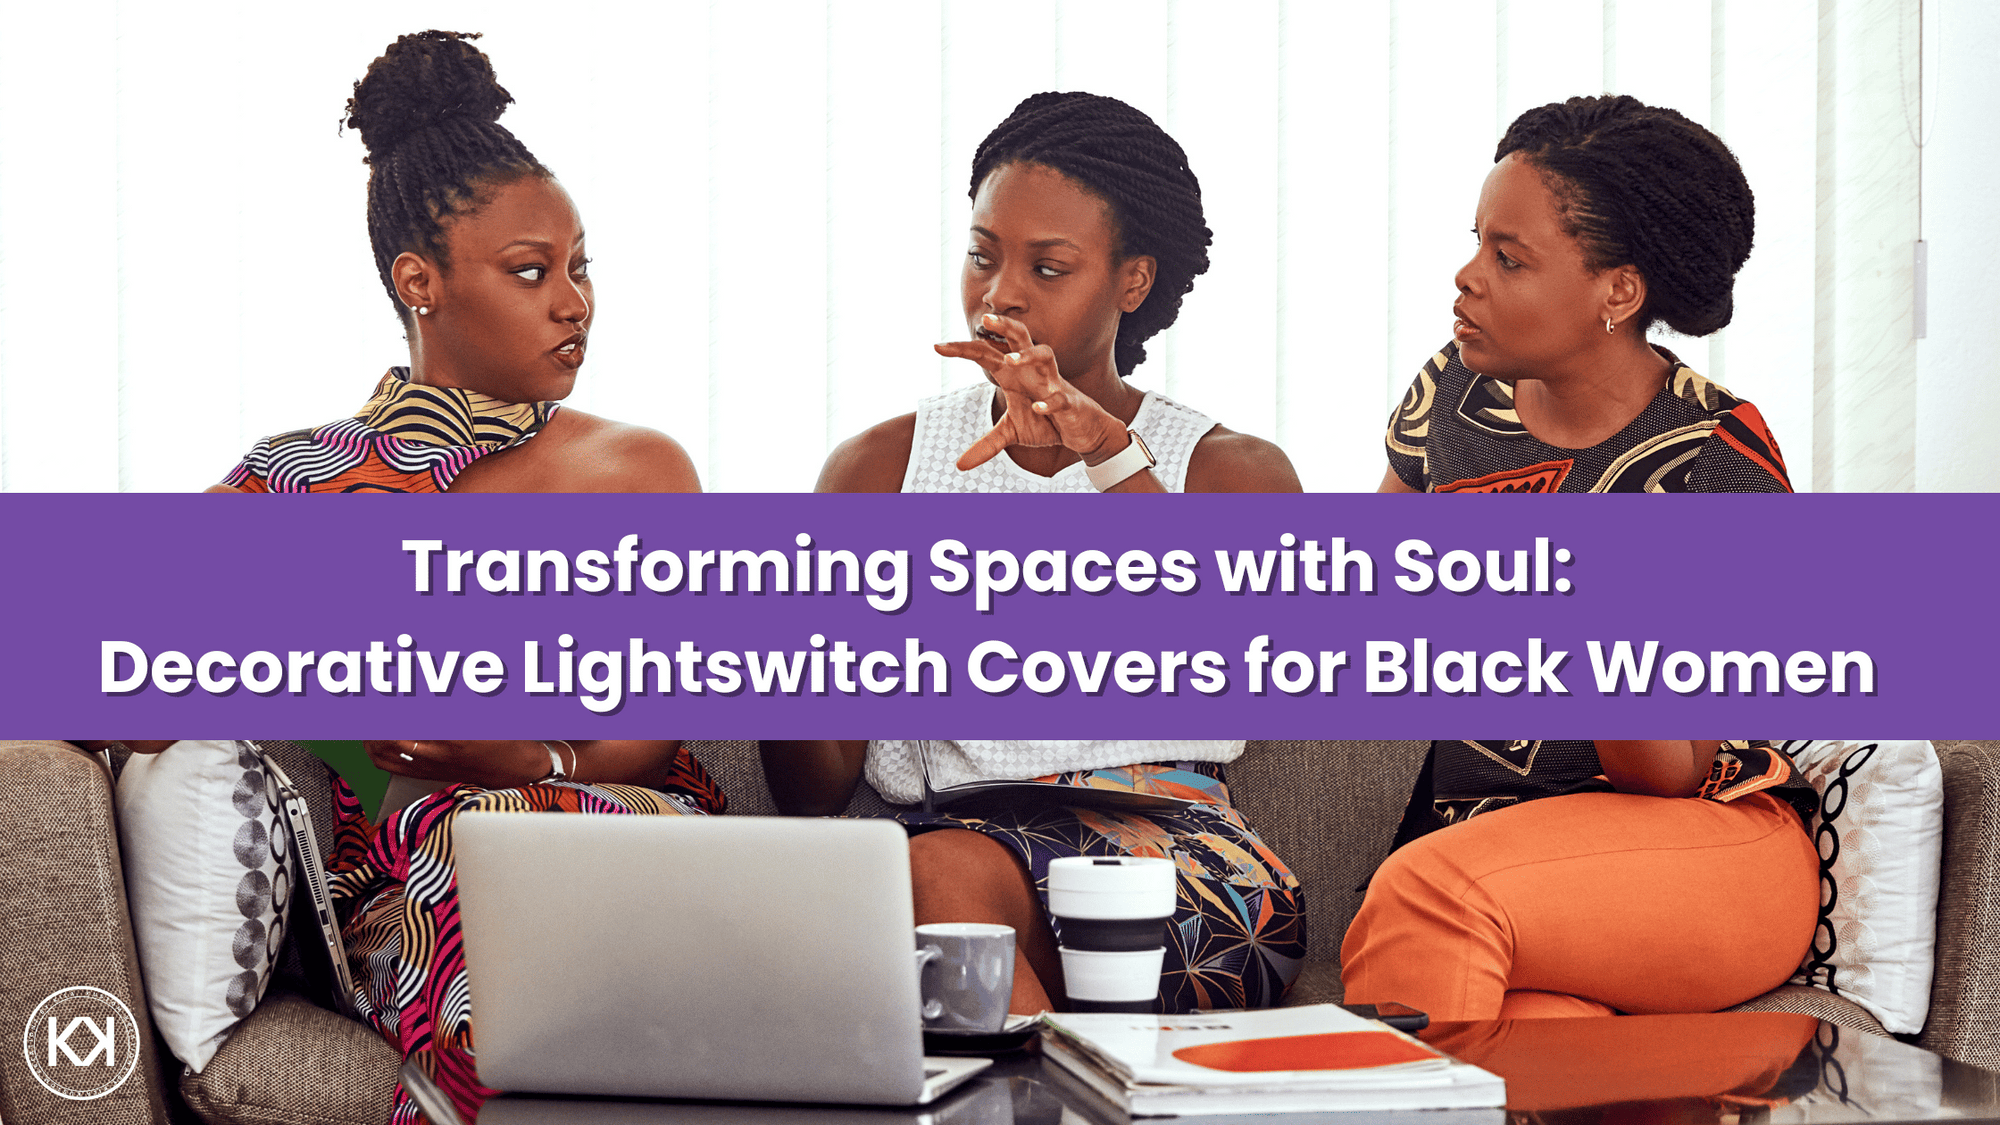 Transforming Spaces with Soul: Decorative Lightswitch Covers for Black Women